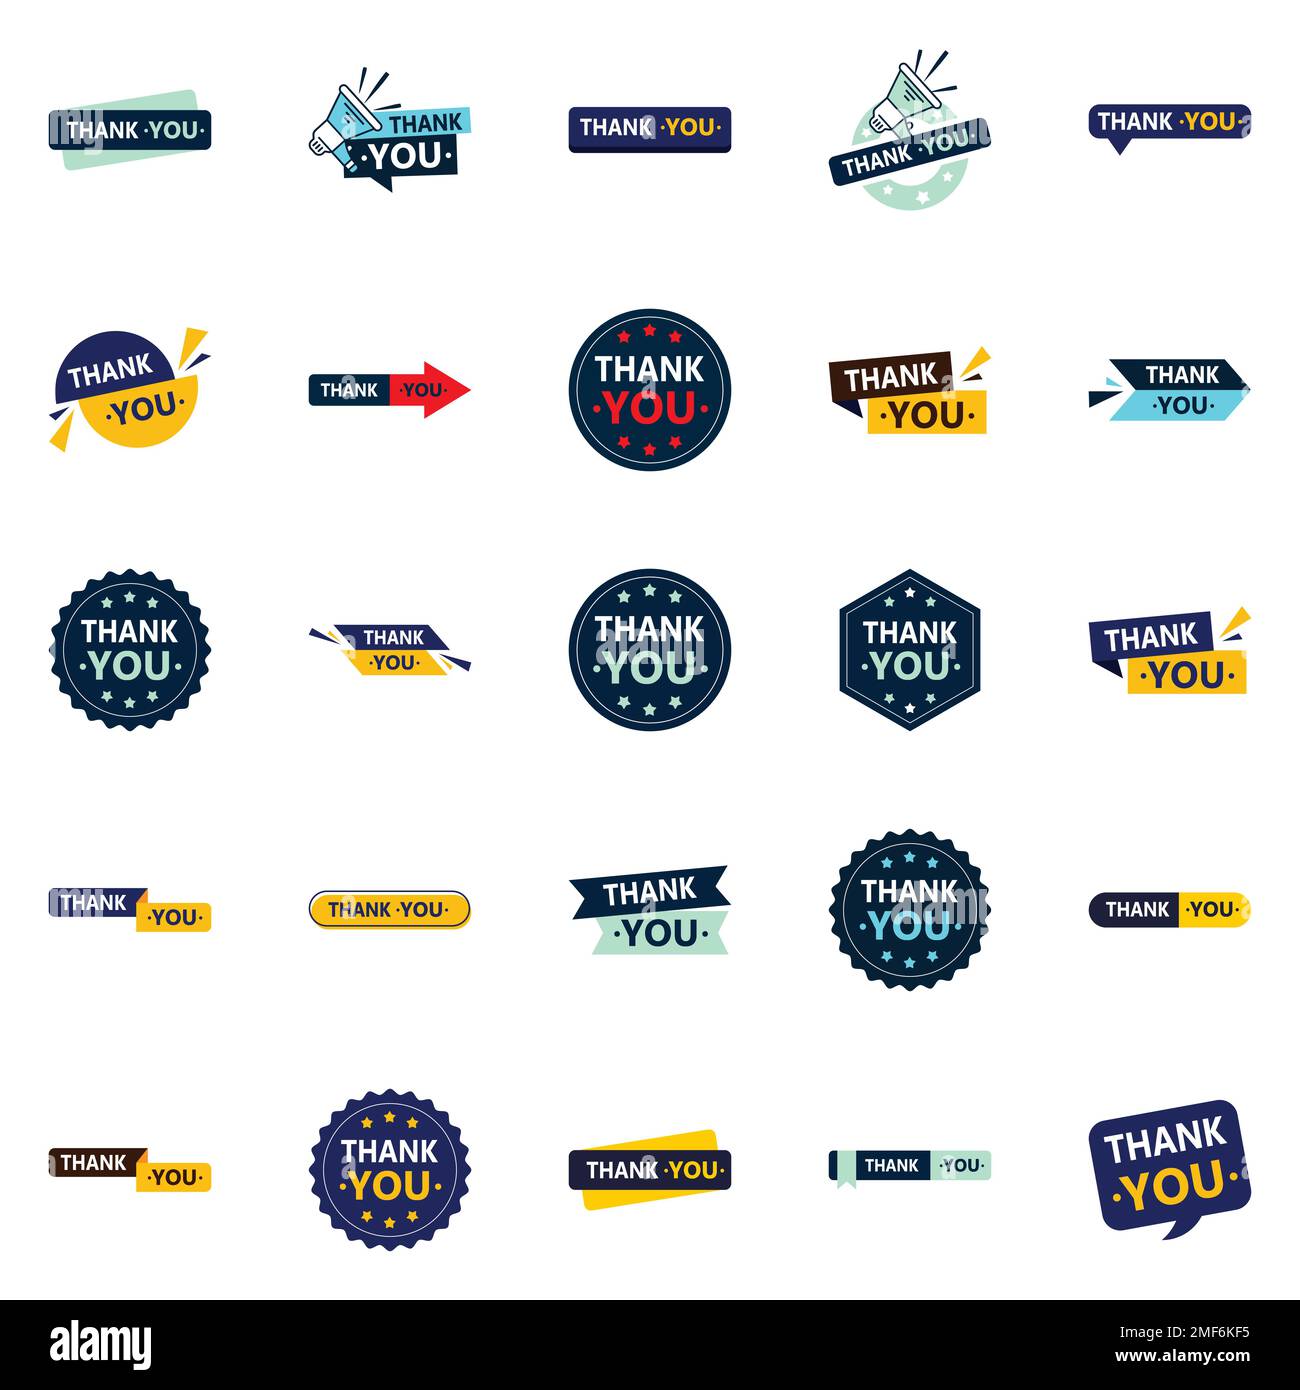 25 High Quality Vector Elements for Saying Thank You Stock Vector